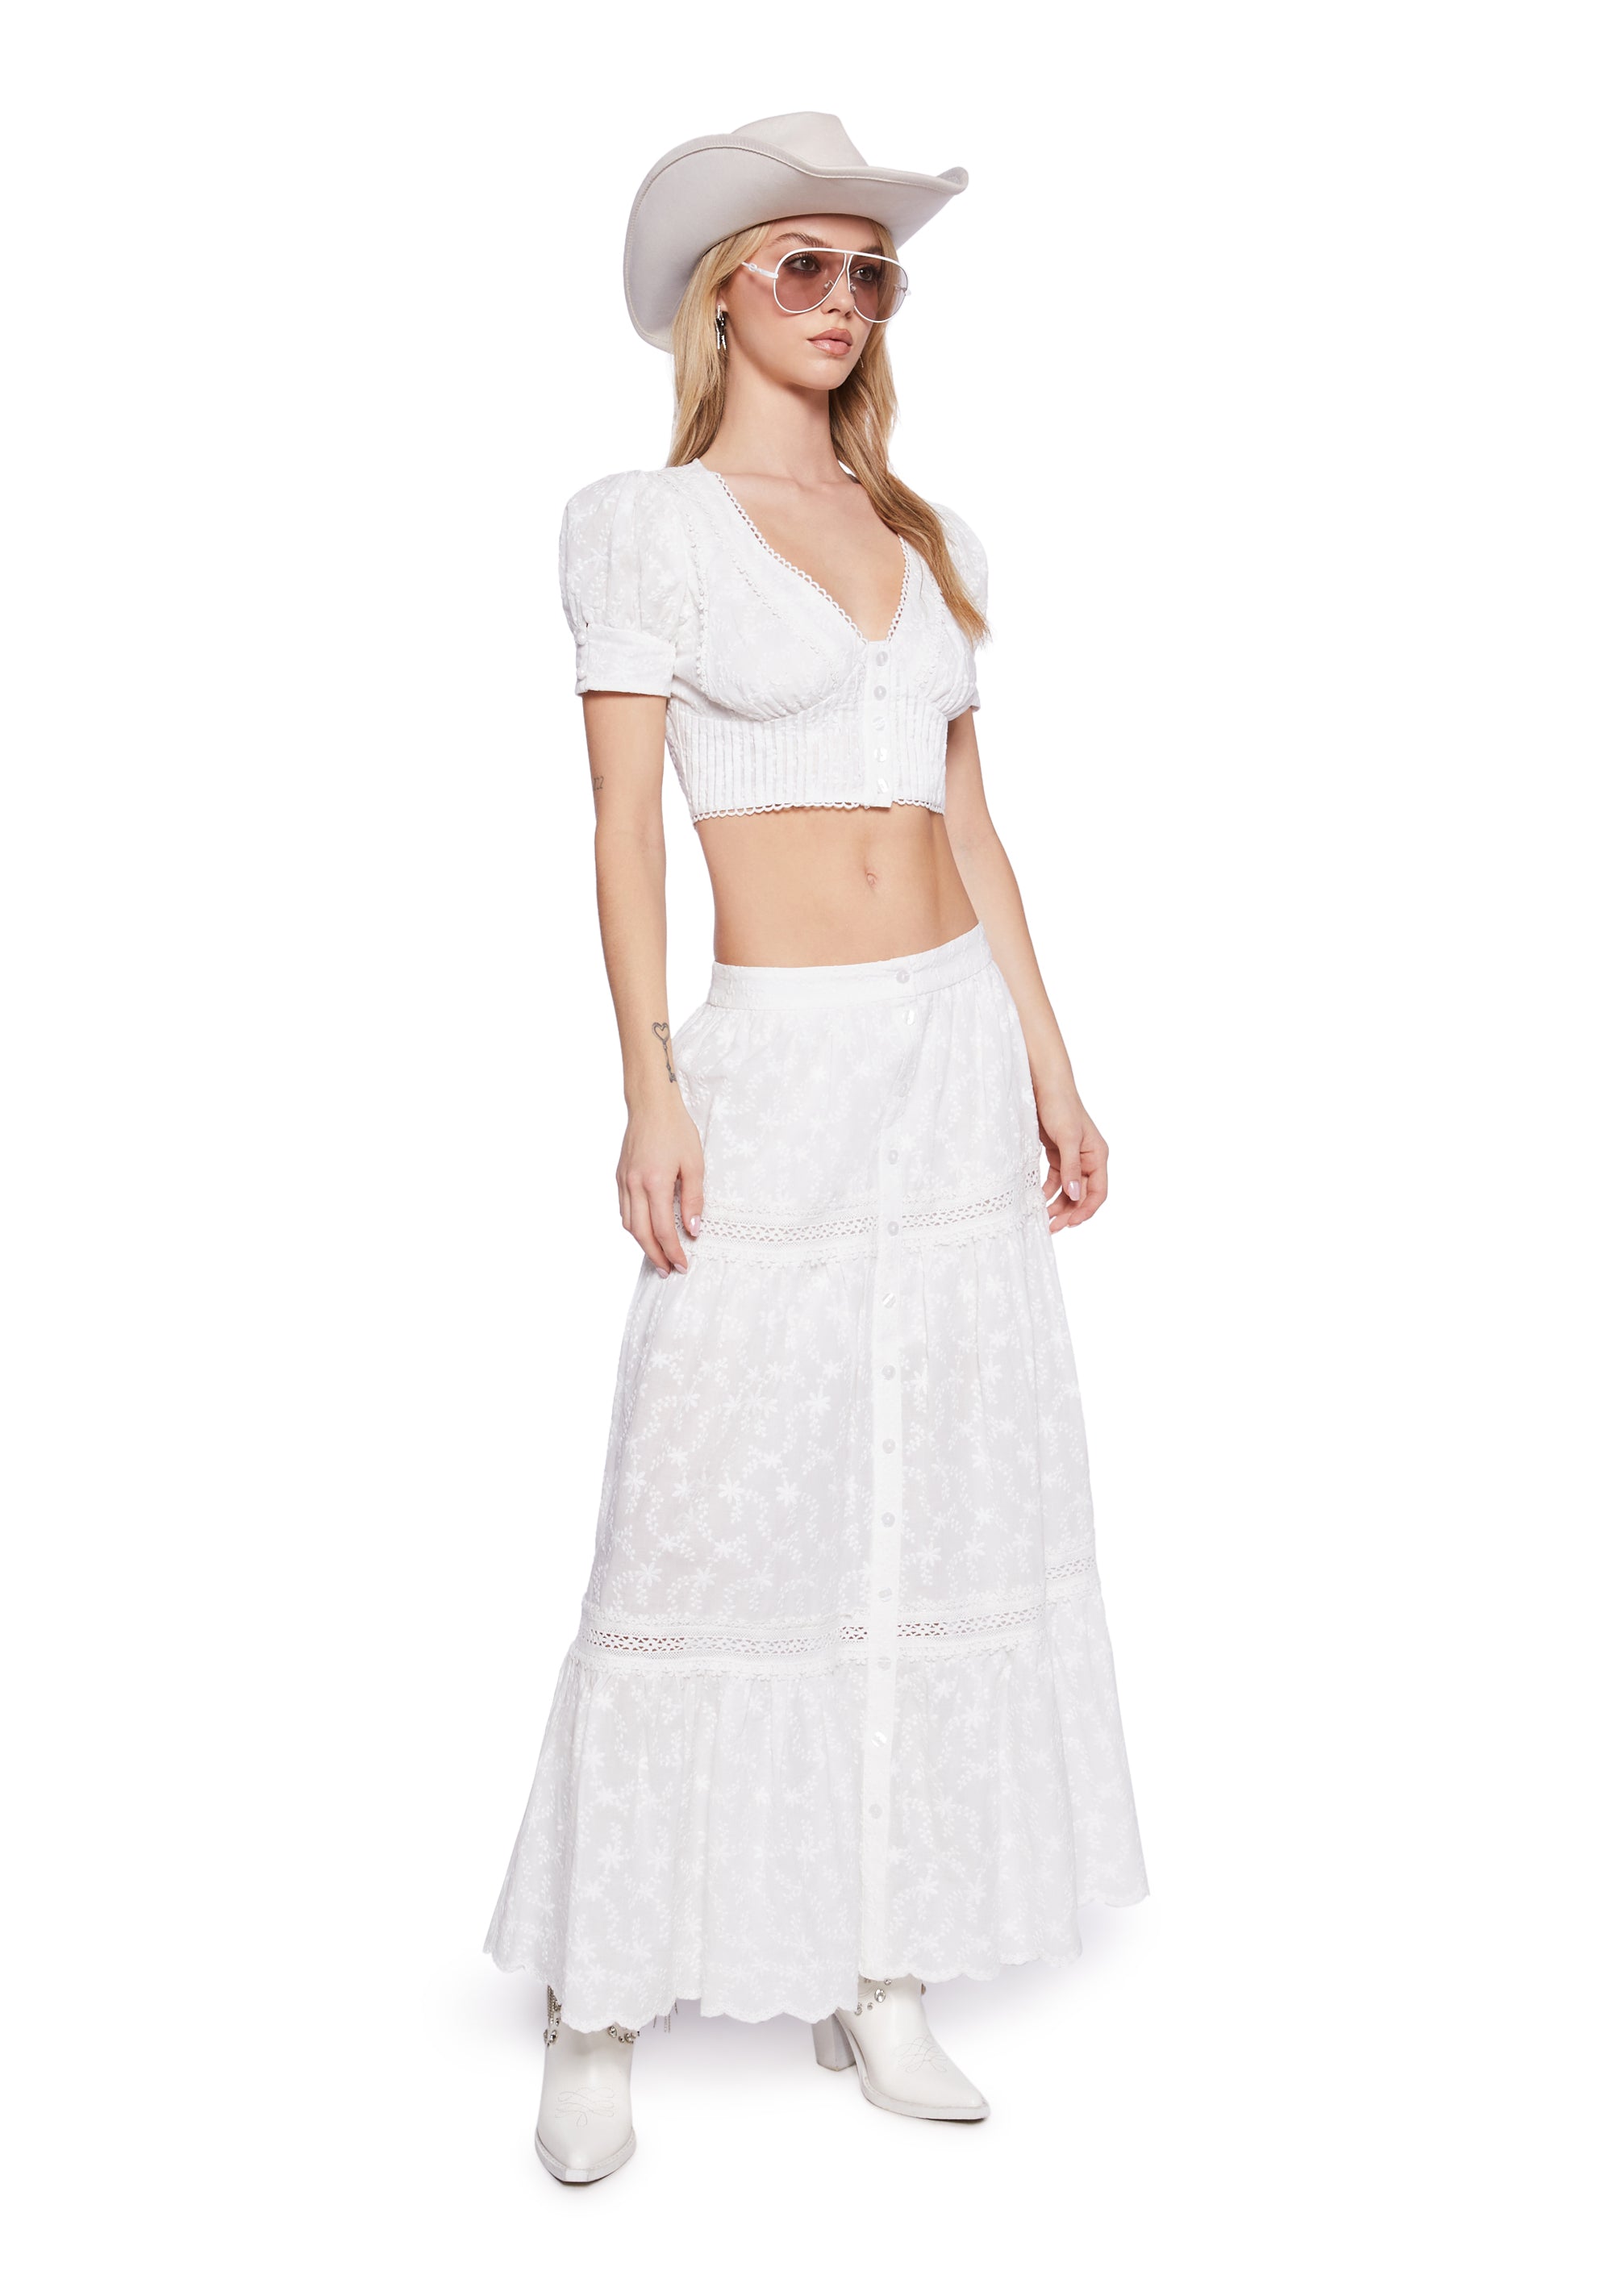 Our Love Song Maxi Skirt